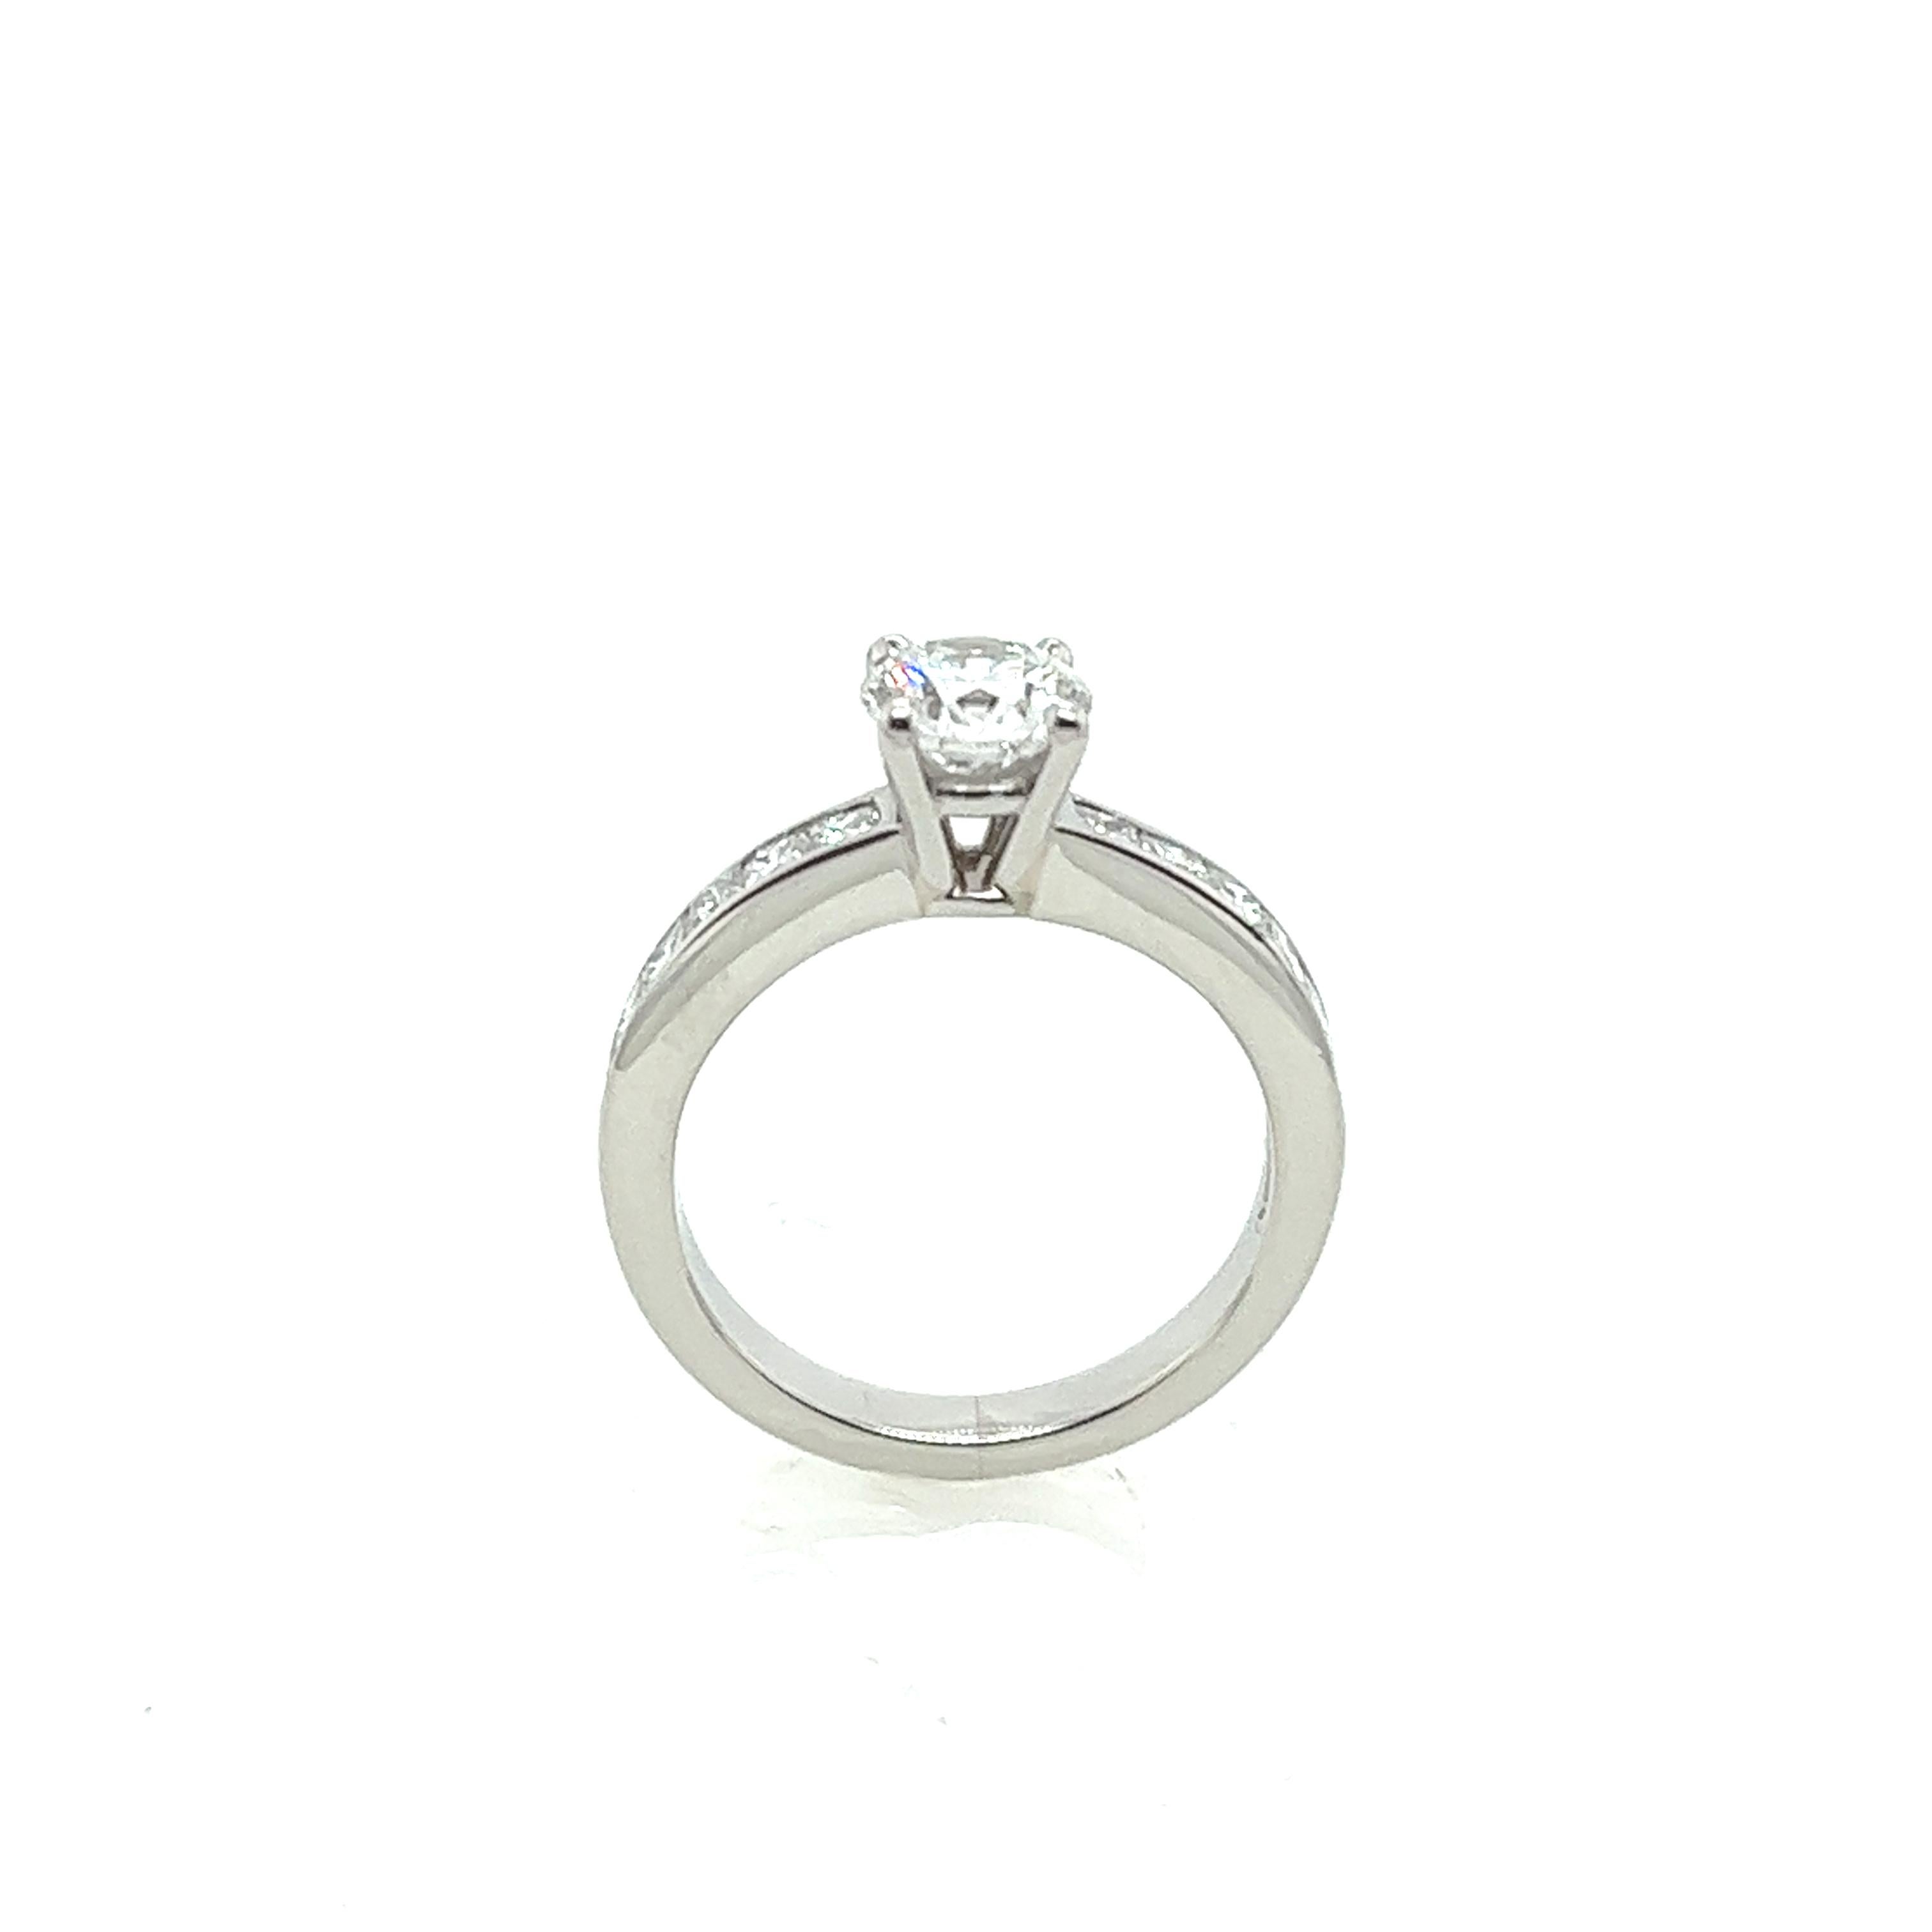 This Platinum solitaire diamond ring 0.70ct E colour, with an HRD certificate, is set with 12 princess cut diamonds on the shoulders totaling 0.36ct.

This ring is elegant and beautiful and will last as long as your love does.

Total Diamond Weight: